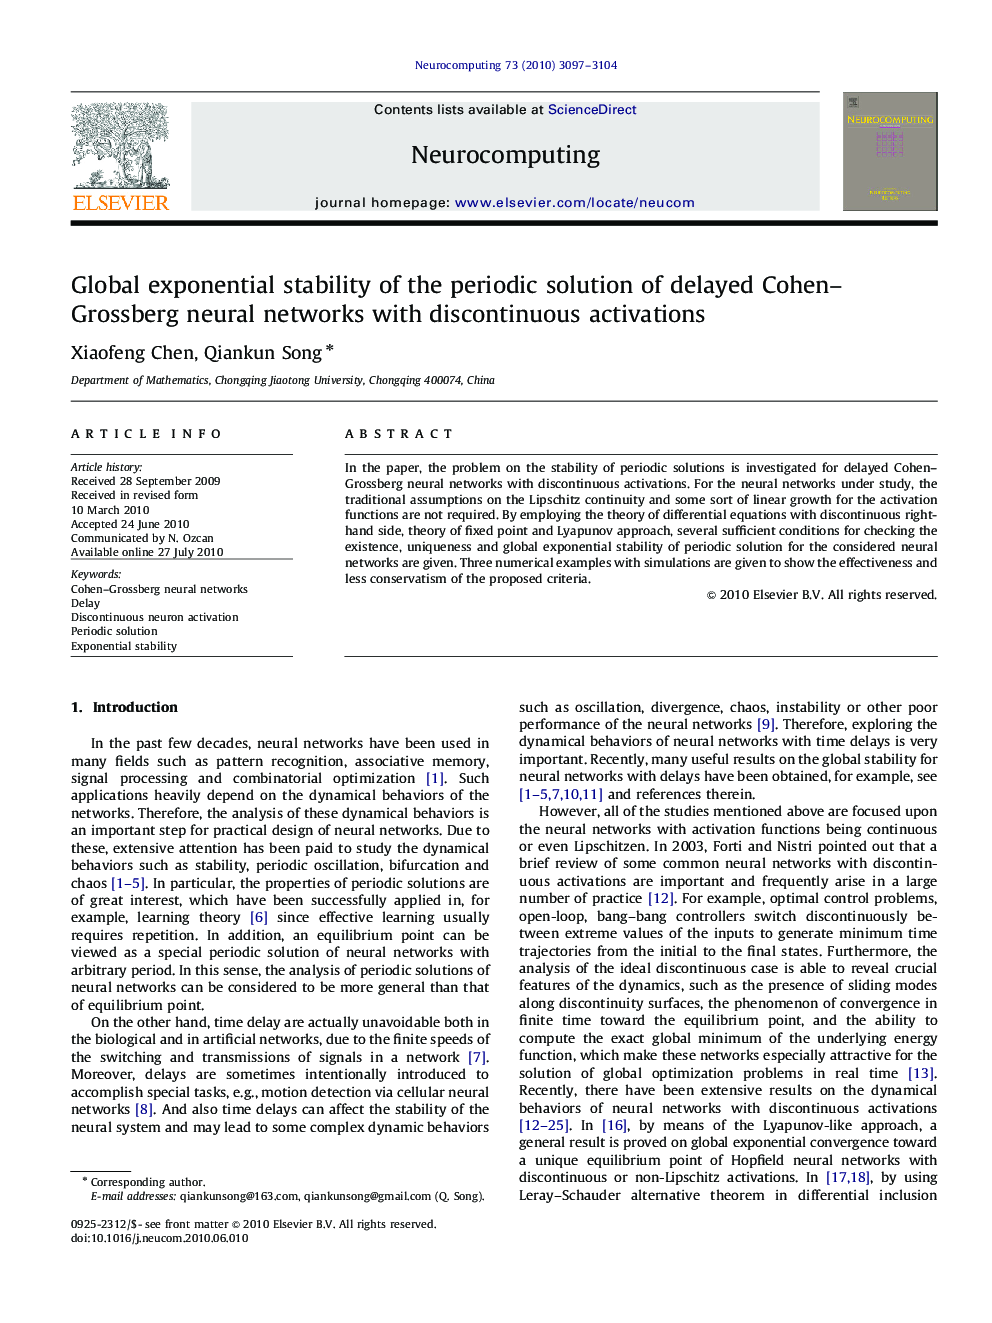 Global exponential stability of the periodic solution of delayed Cohen–Grossberg neural networks with discontinuous activations